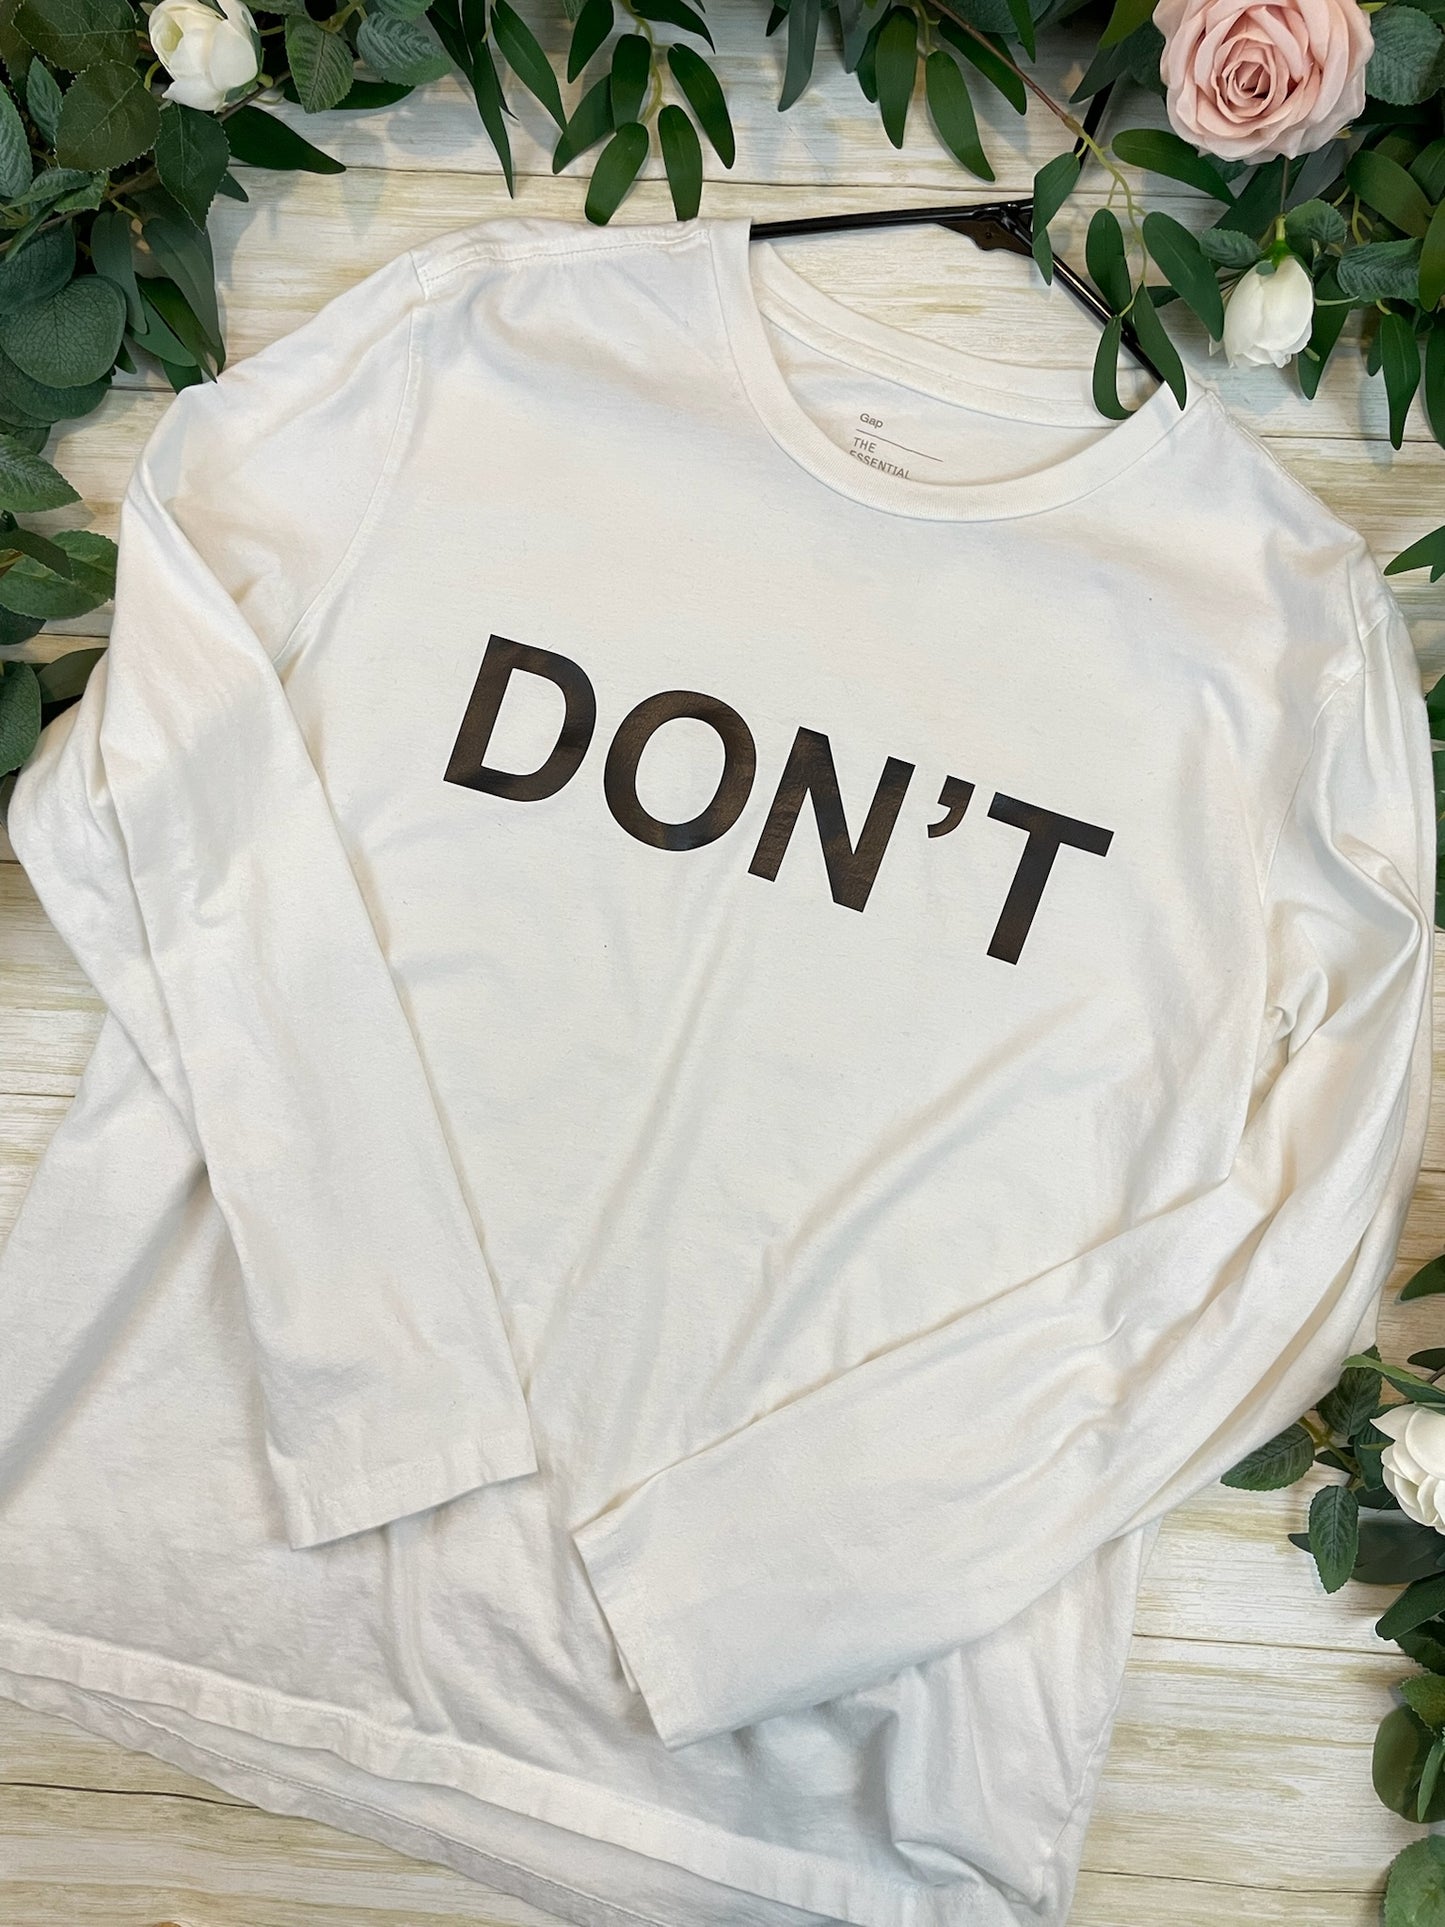 Thrifted - Large - "Don't"